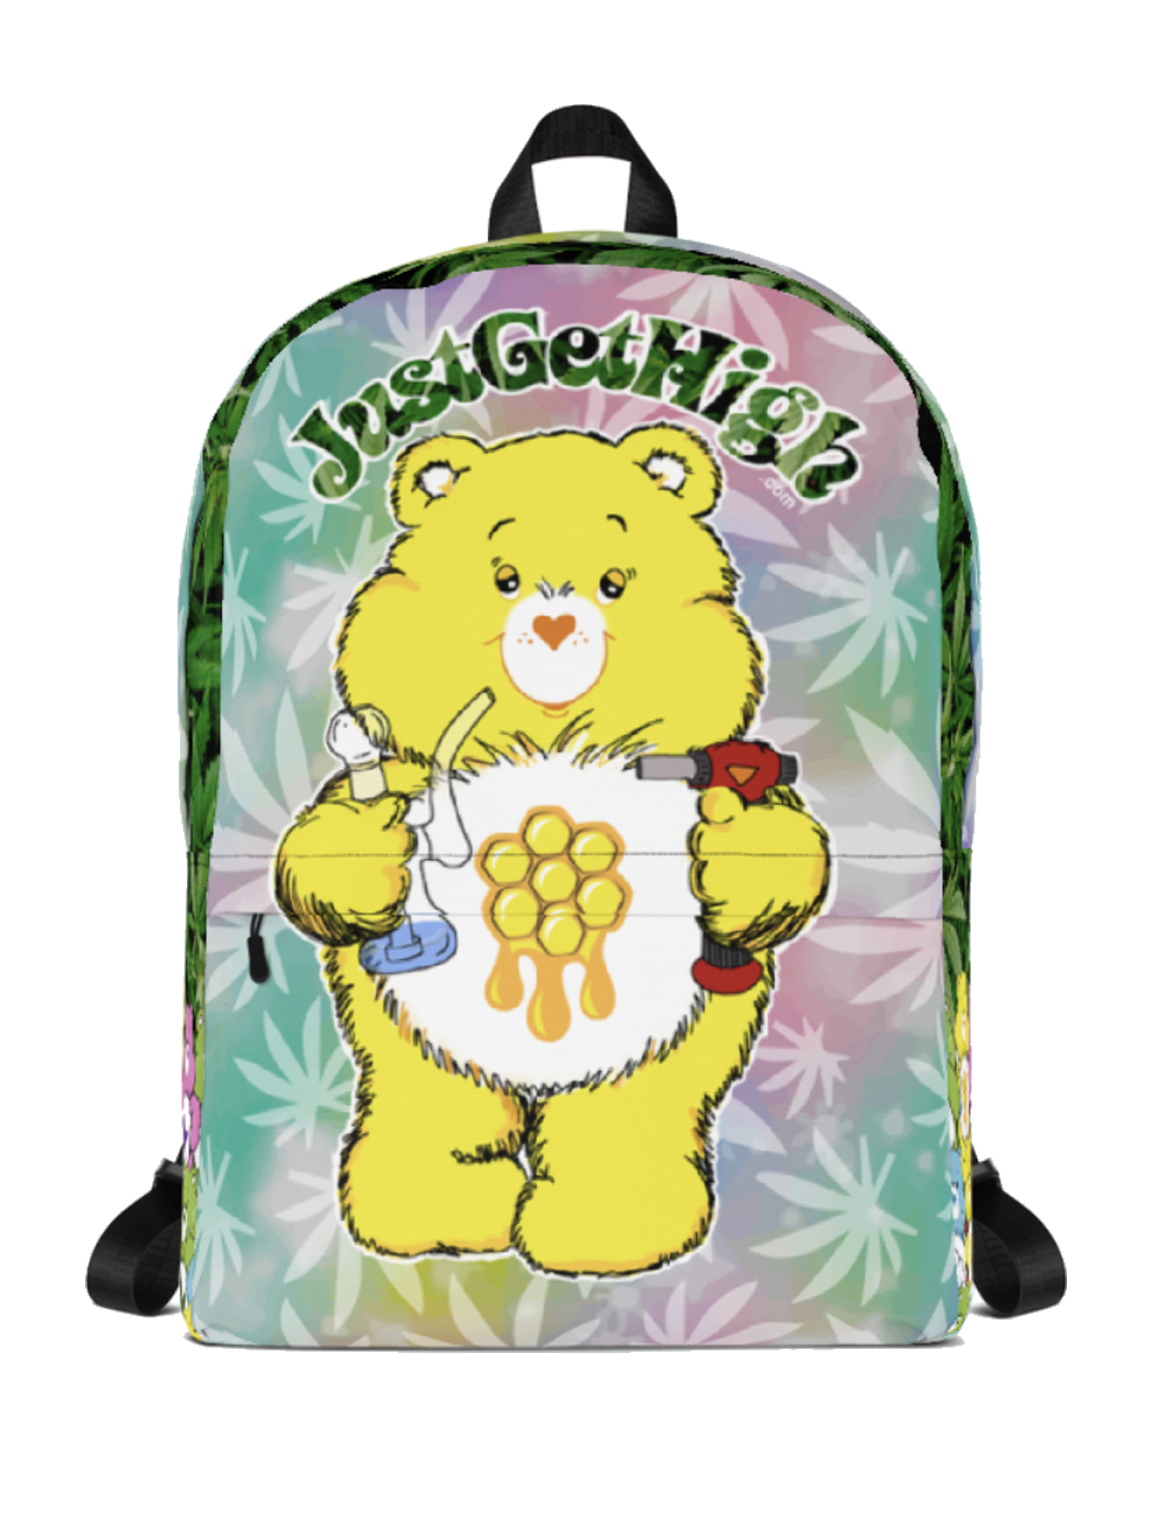 just get high_backpack_cannabear dab_front